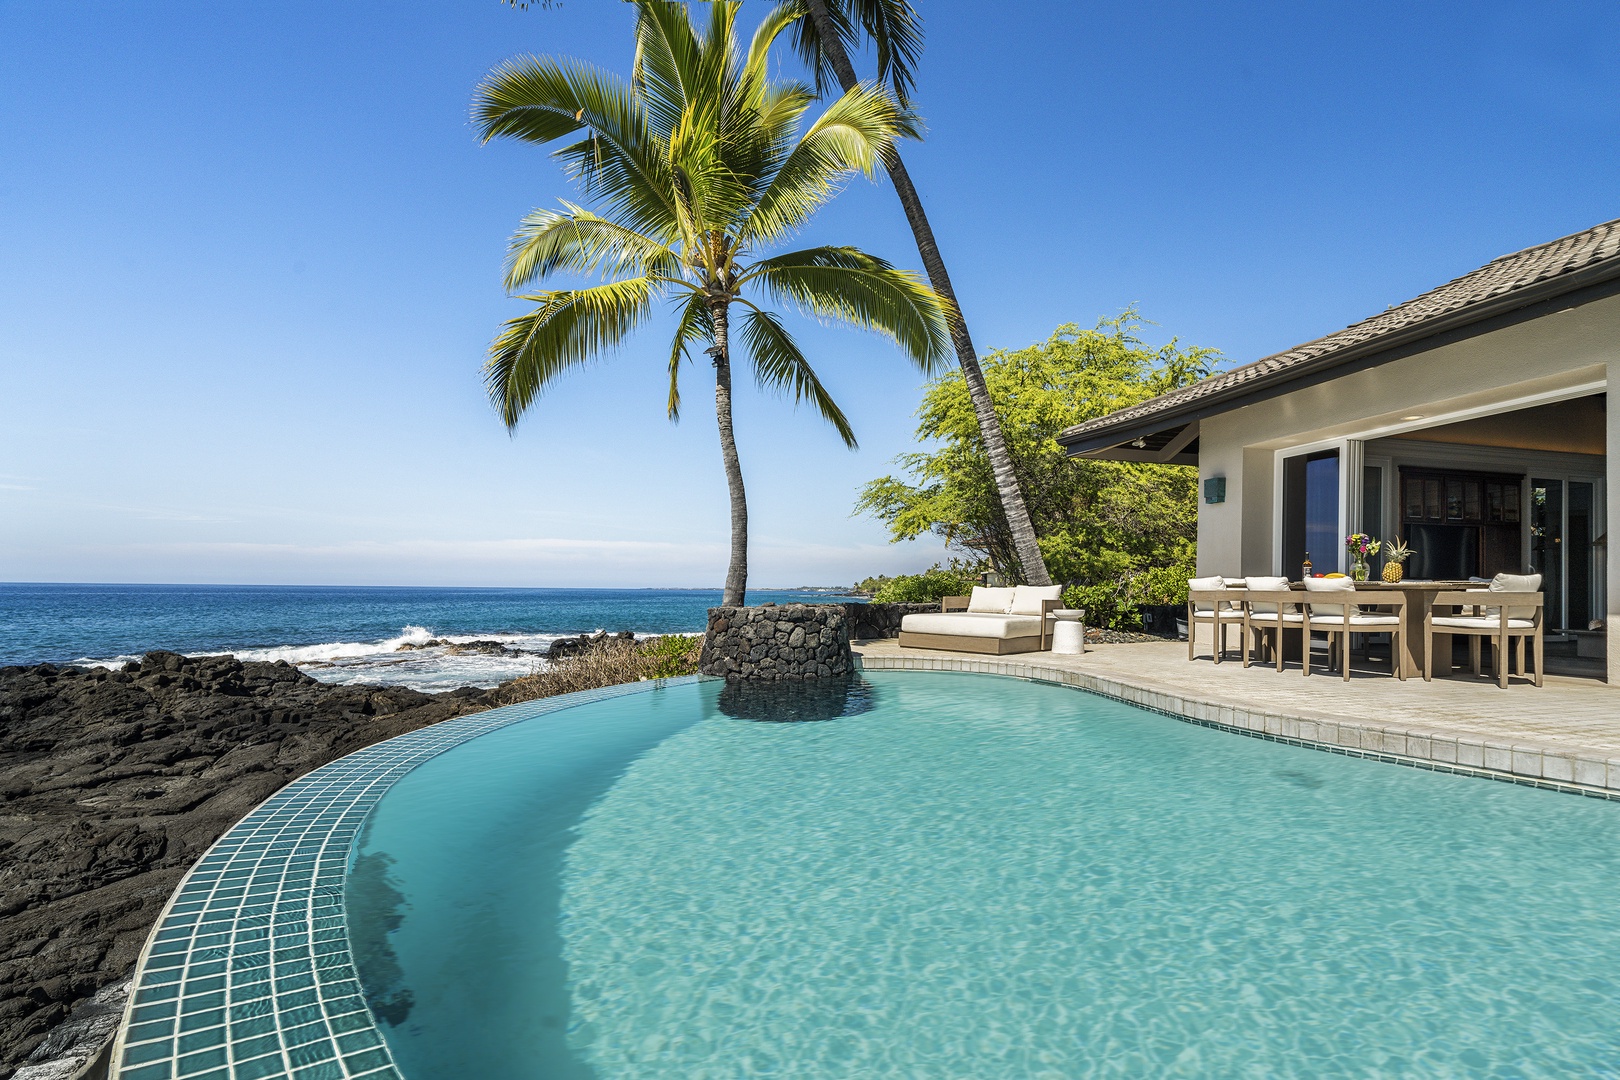 Kailua Kona Vacation Rentals, Ali'i Point #9 - Tide pools and coco palms remind you why you came to paradise